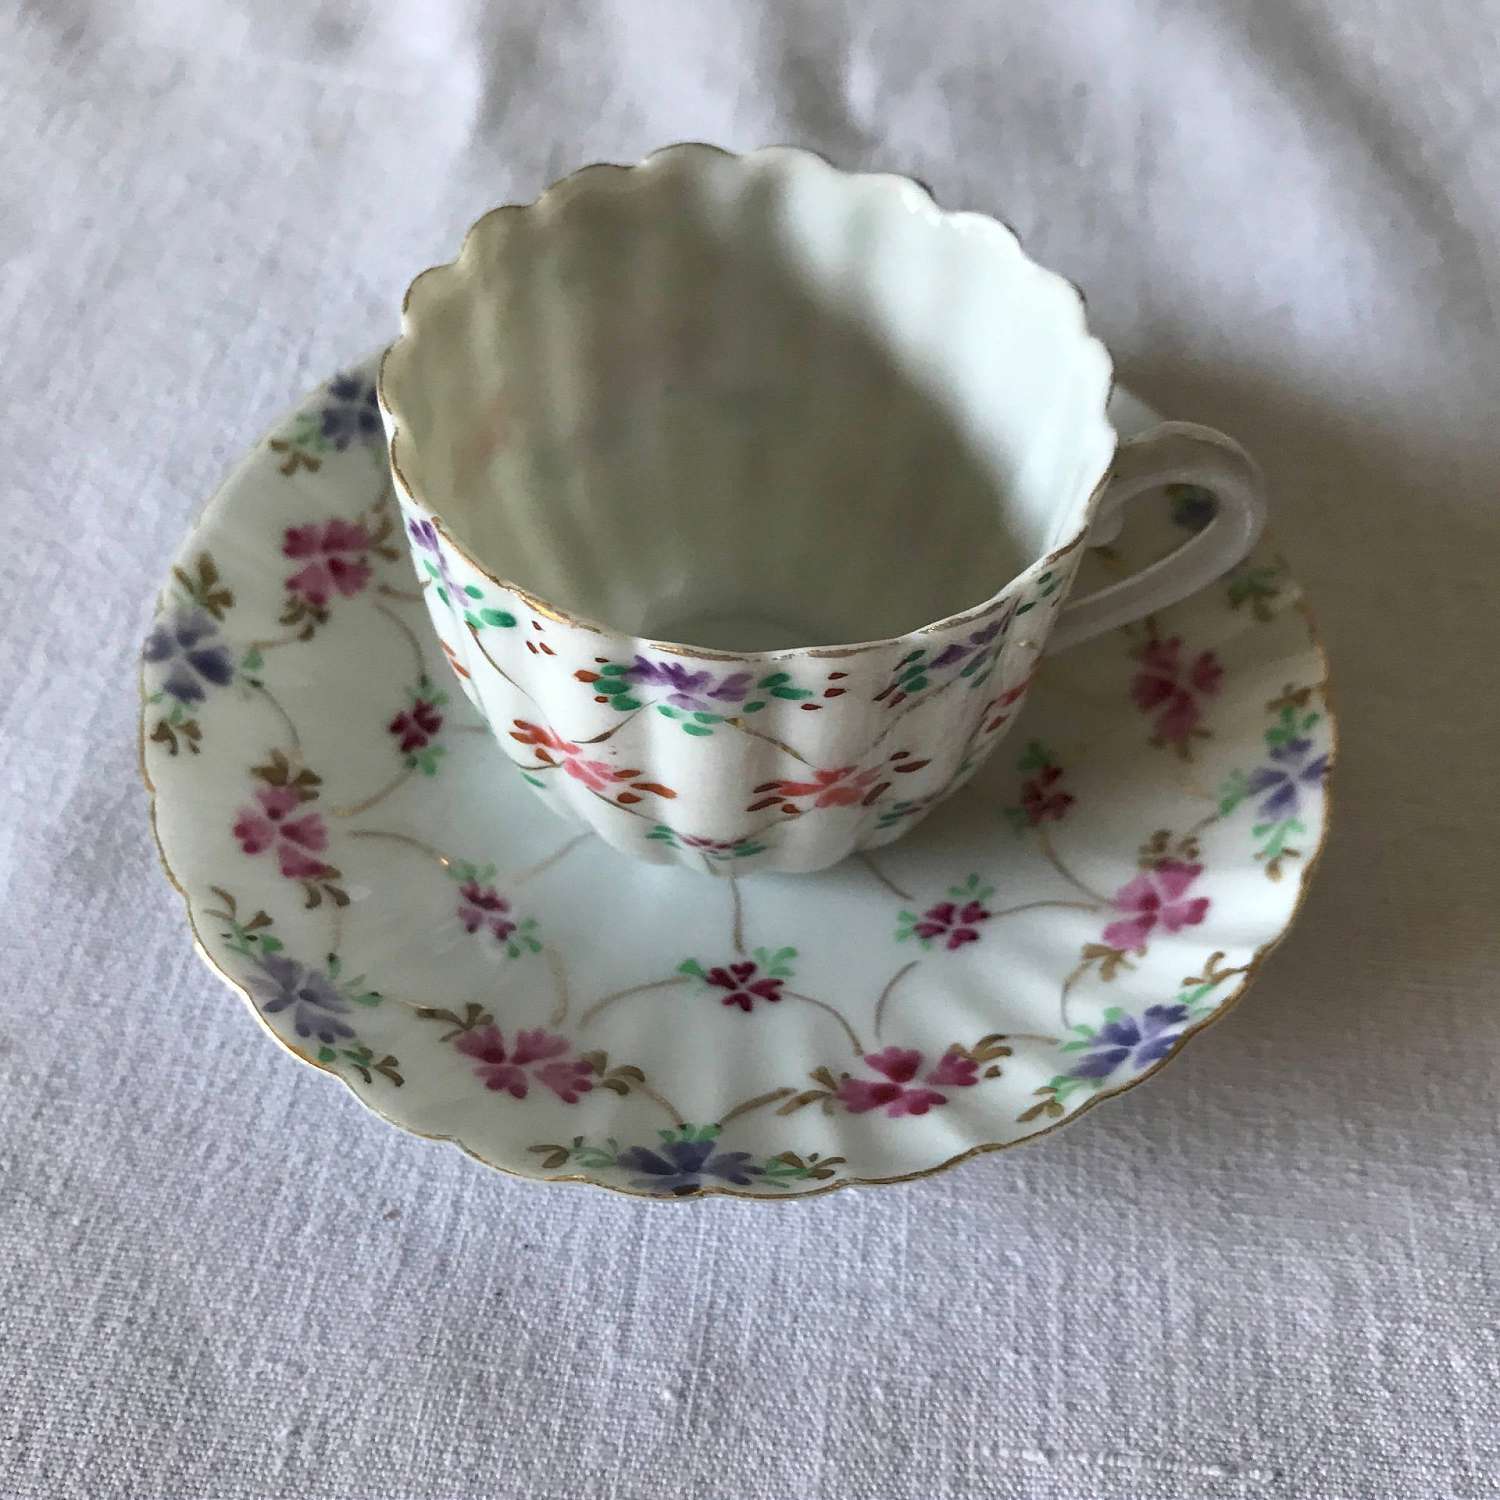 https://www.truevintageantiques.com/wp-content/uploads/2019/12/vintage-fine-bone-china-demitasse-tea-cup-and-saucer-ribbed-pattern-china-tiny-flowers-pink-purple-orange-japan-collectible-display-5df019c92-scaled.jpg